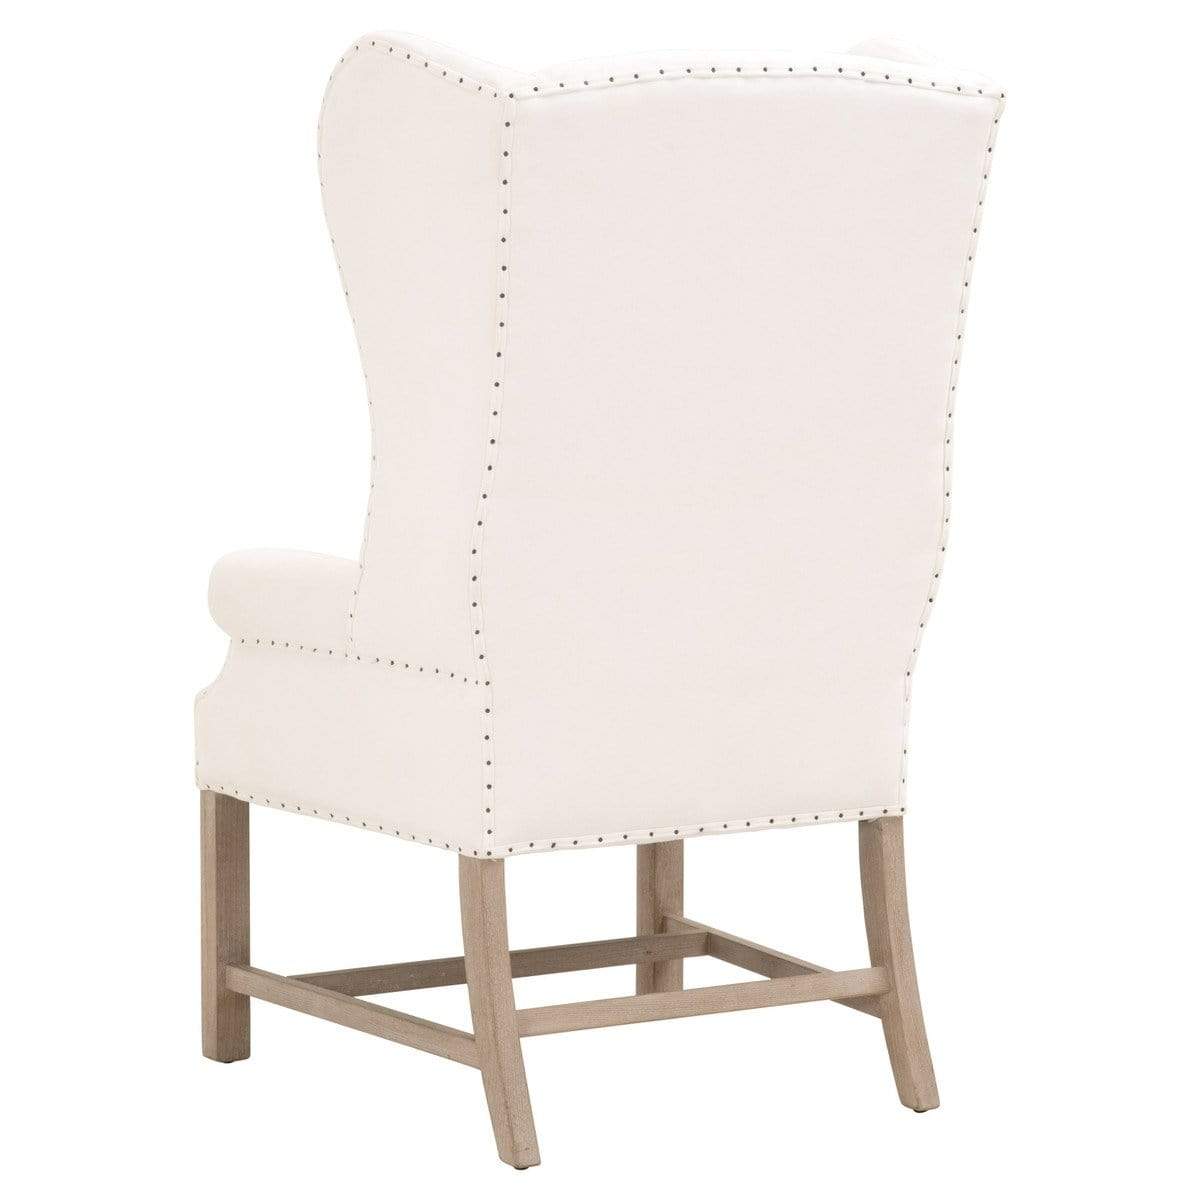 BLU Home Chateau Arm Chair - Bisque French Linen Furniture